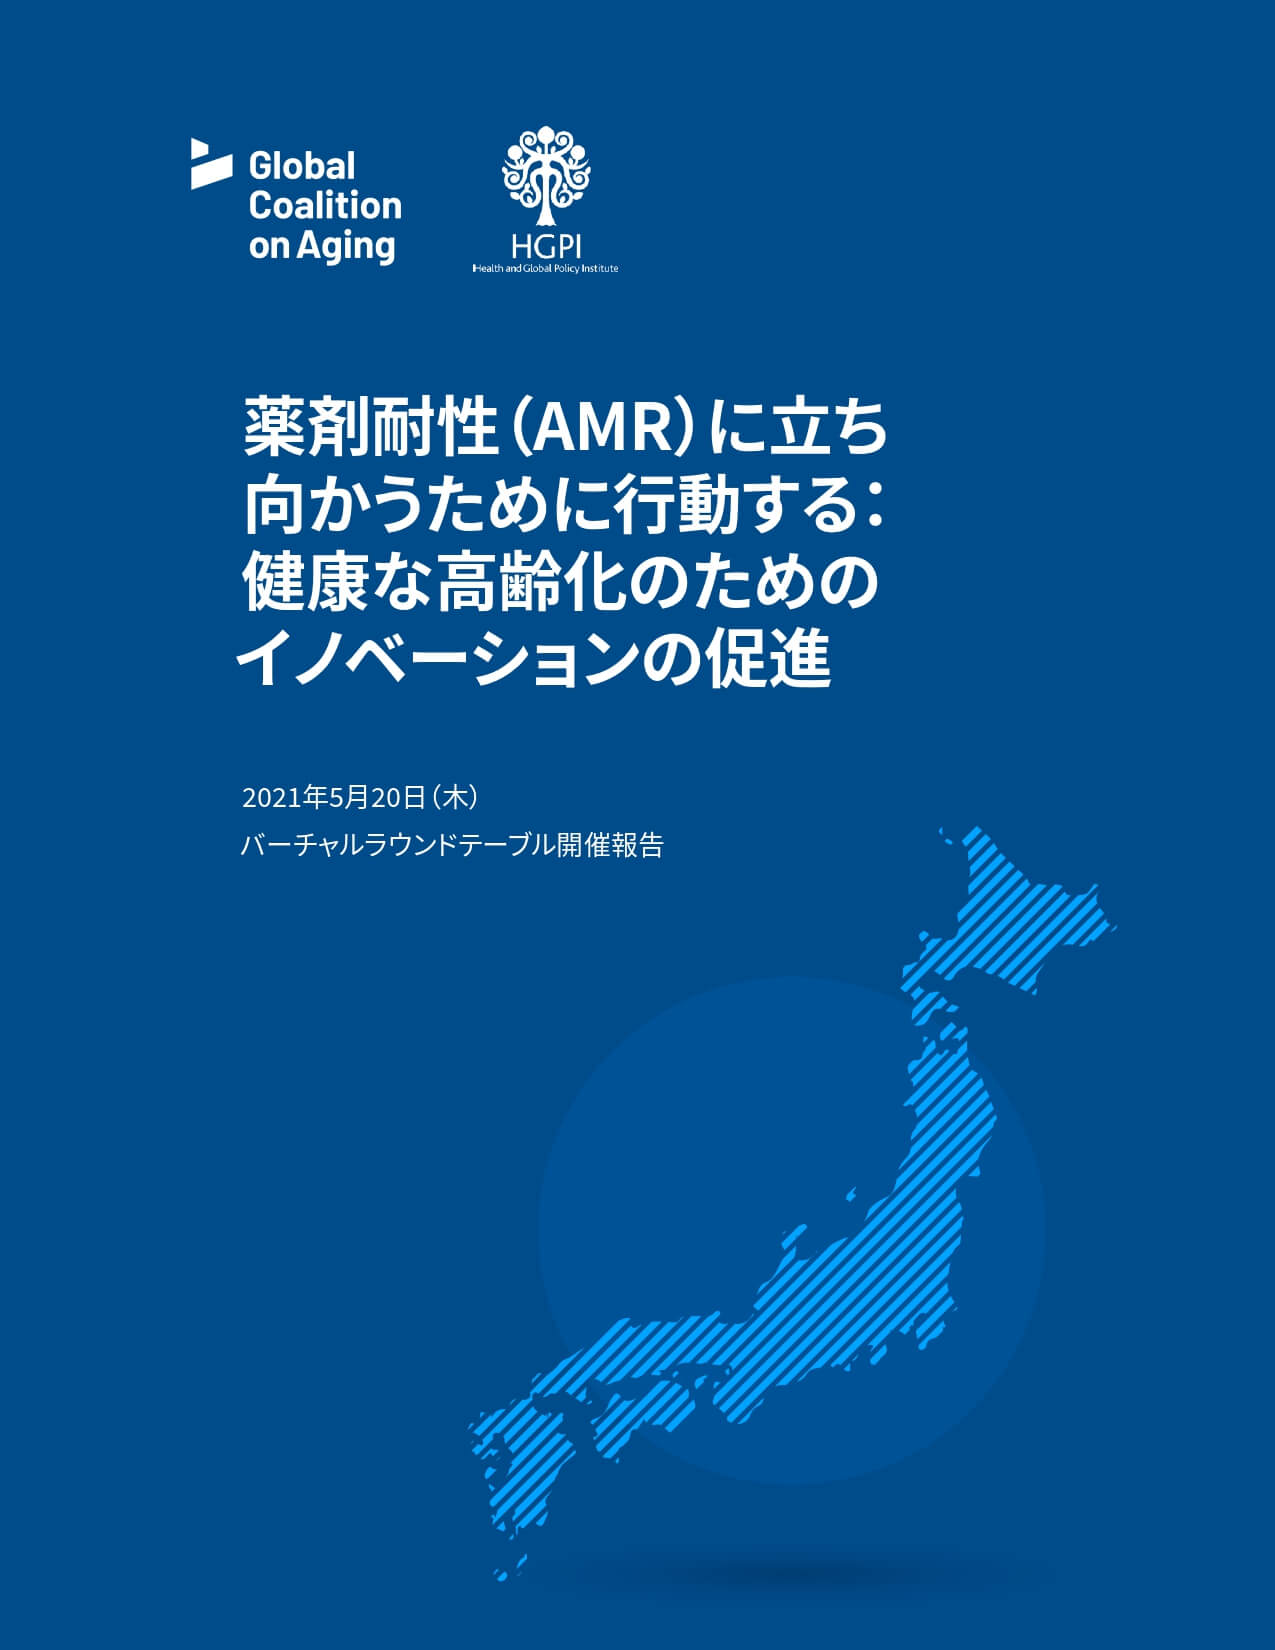 AMR Alliance Japan Policy Recommendations